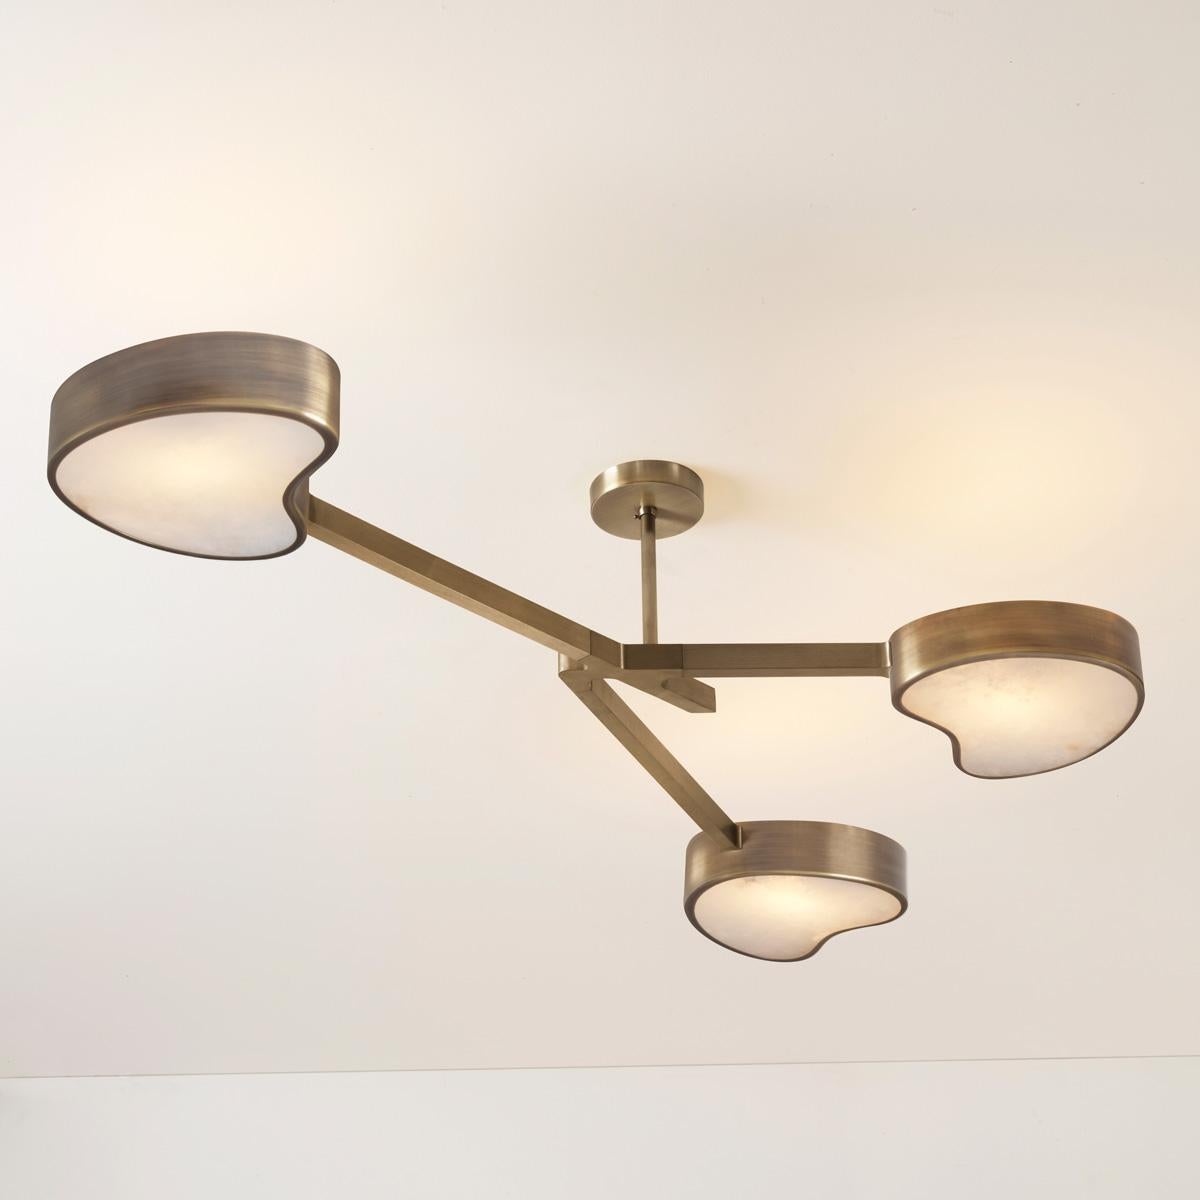 Cuore N.3 Ceiling Light by Gaspare Asaro. Satin Brass and Sand White For Sale 3